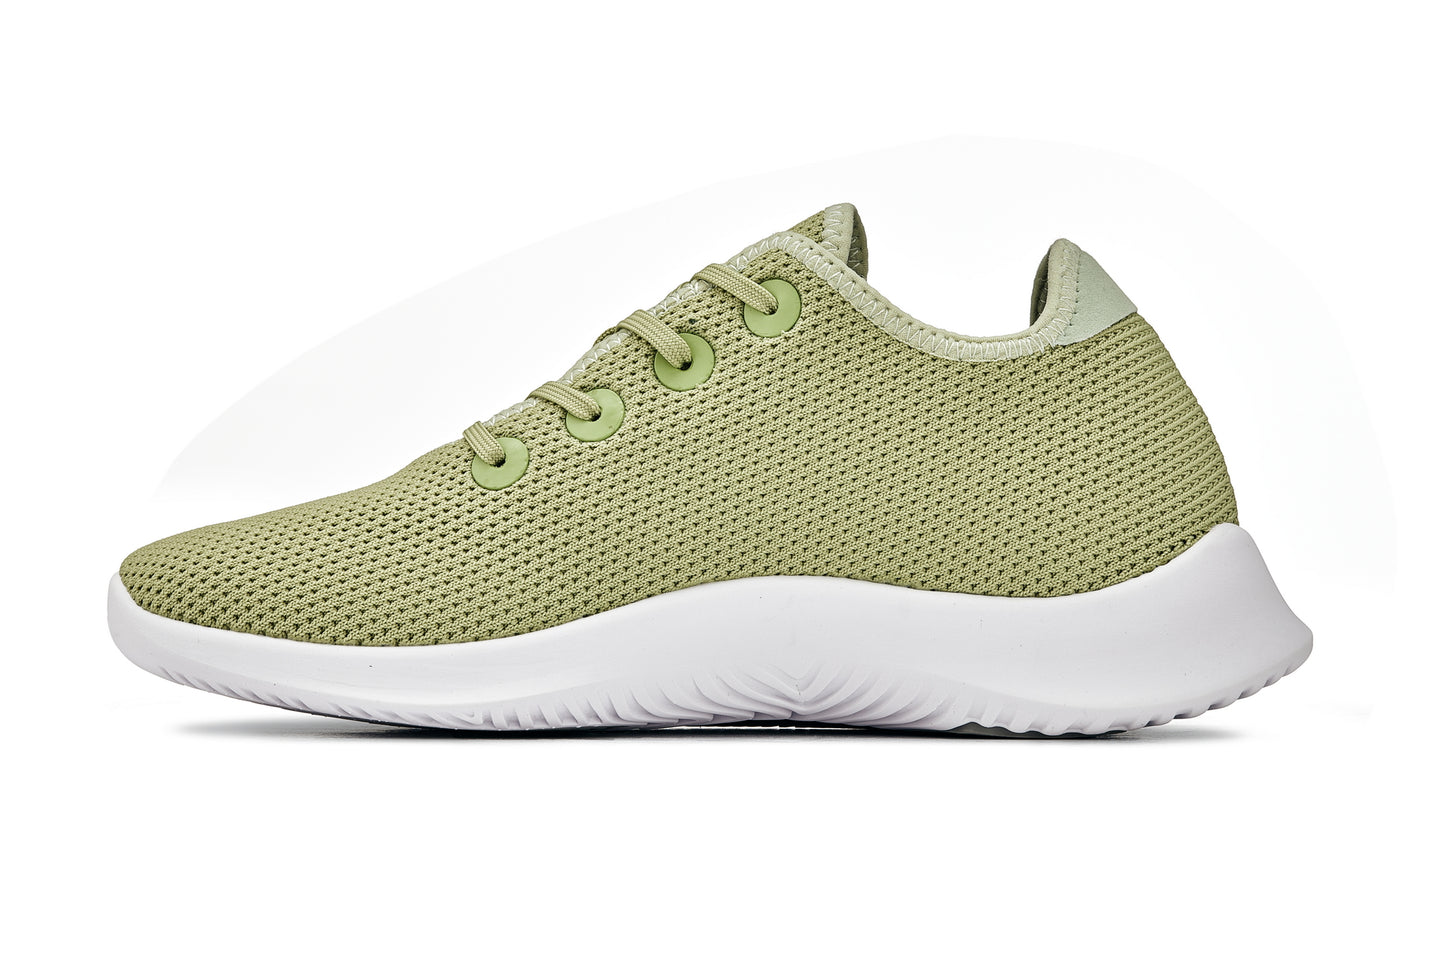 CALTO - Q405 - 2.4 Inches Taller (Pale Lime) - Ultra Lightweight Knitted Sneakers